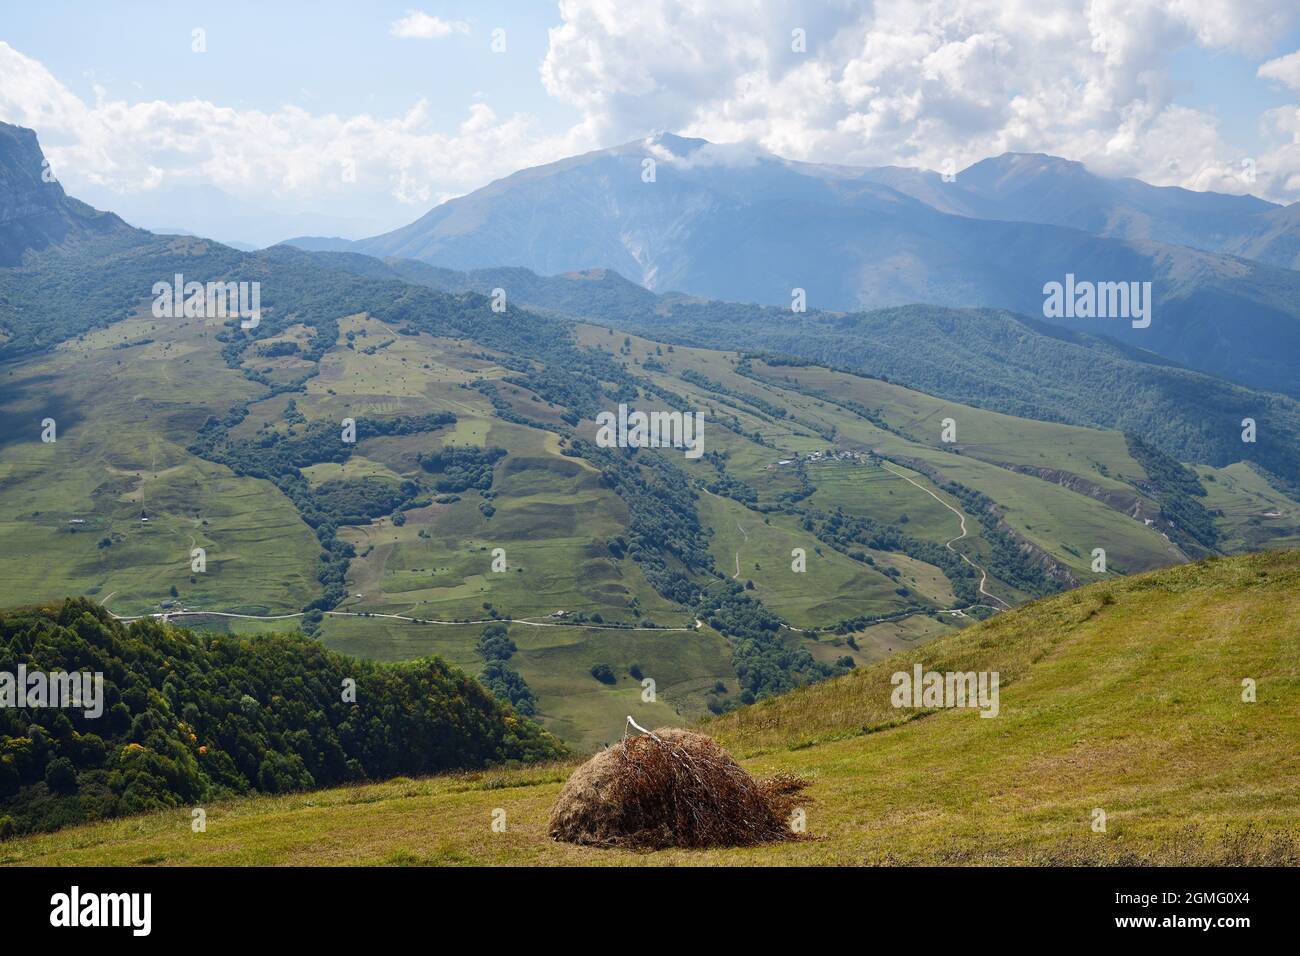 Ф stack of hay. Caucasus alpine meadow and mountains landscape in Chechnya, Russia. Vedeno district of the Chechen Republic Stock Photo